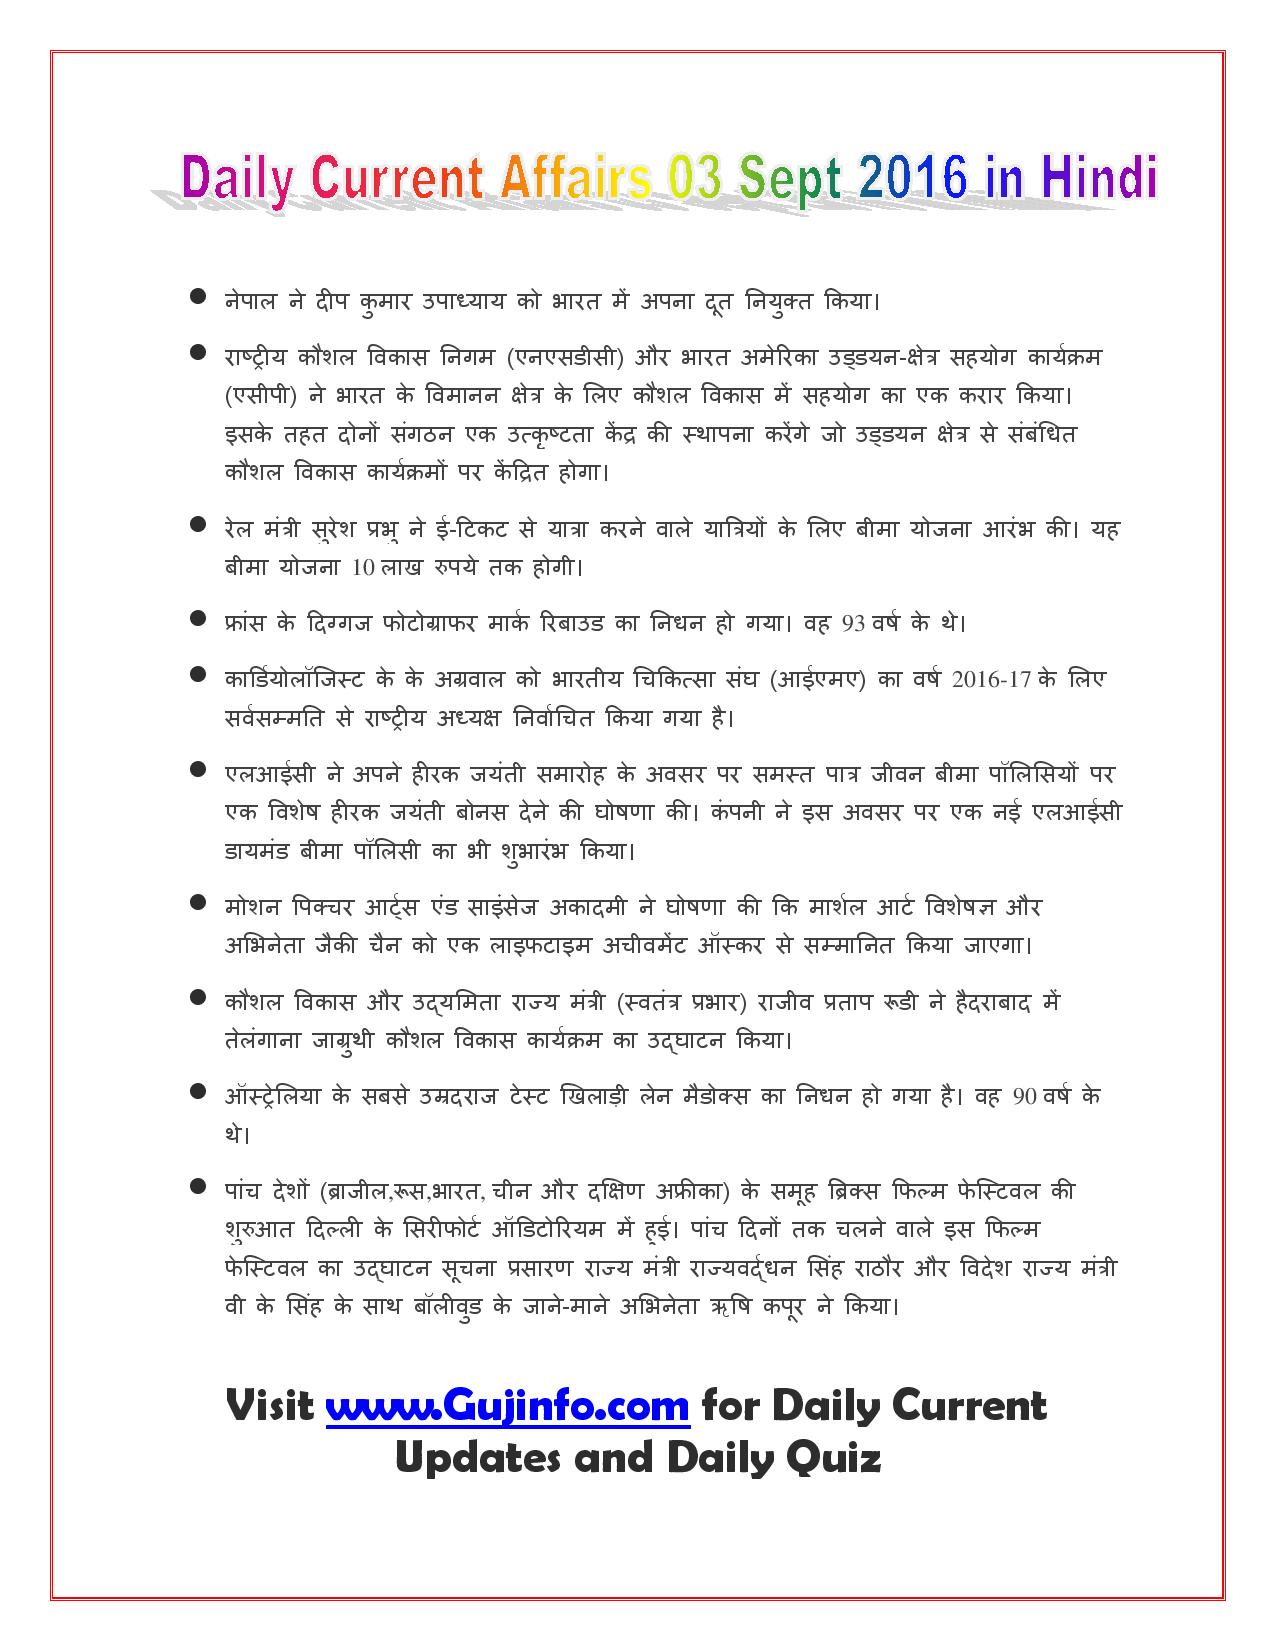 which hindi newspaper is best for current affairs